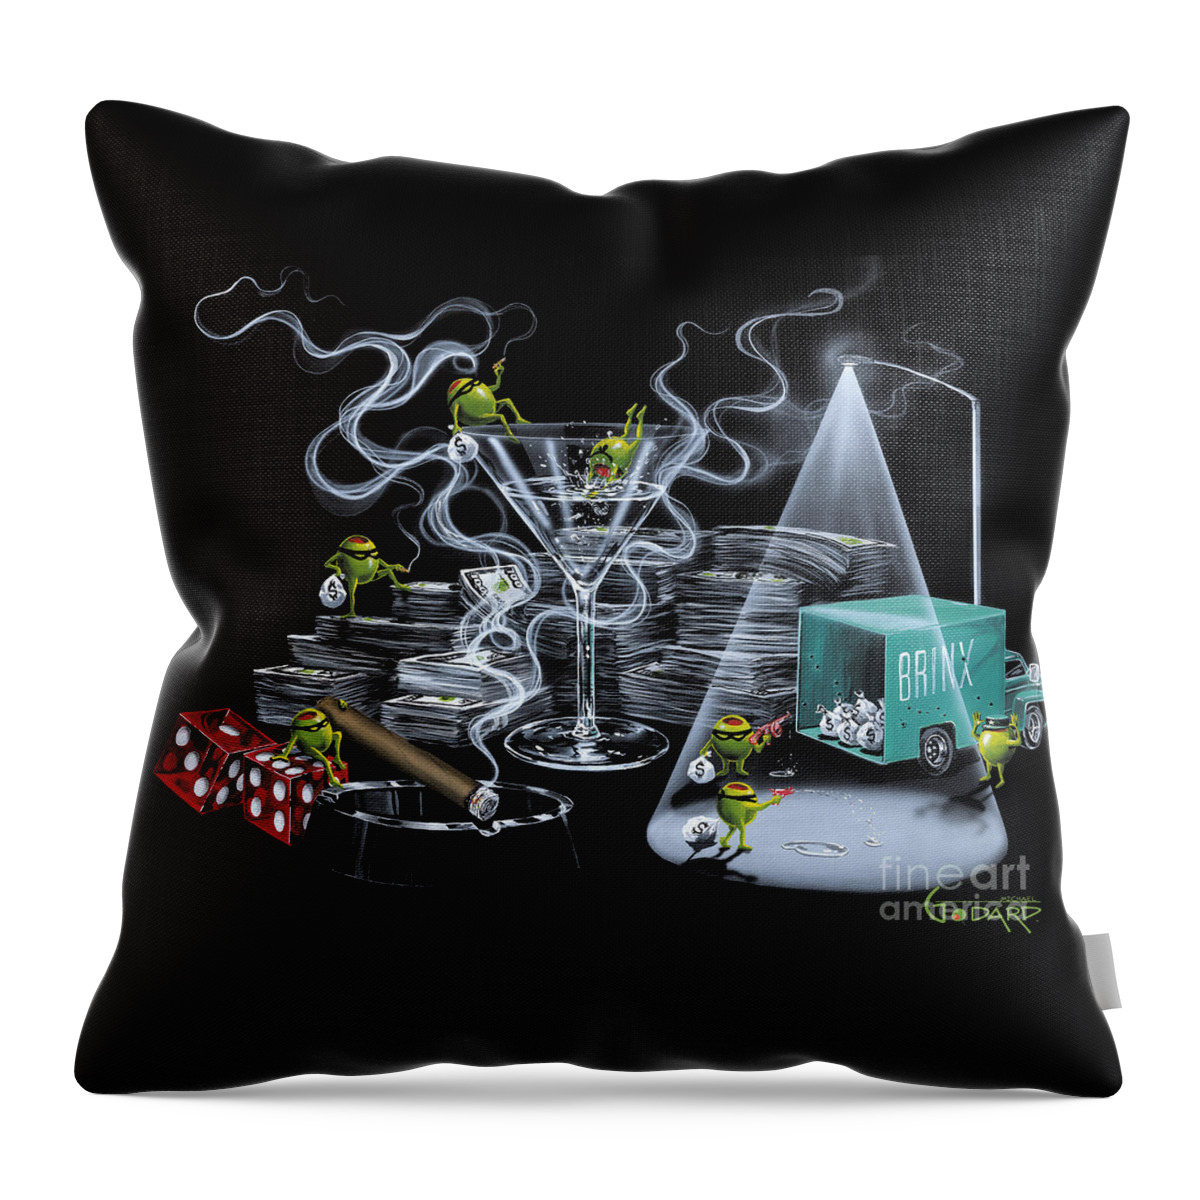 Olives Throw Pillow featuring the painting The Heist by Michael Godard